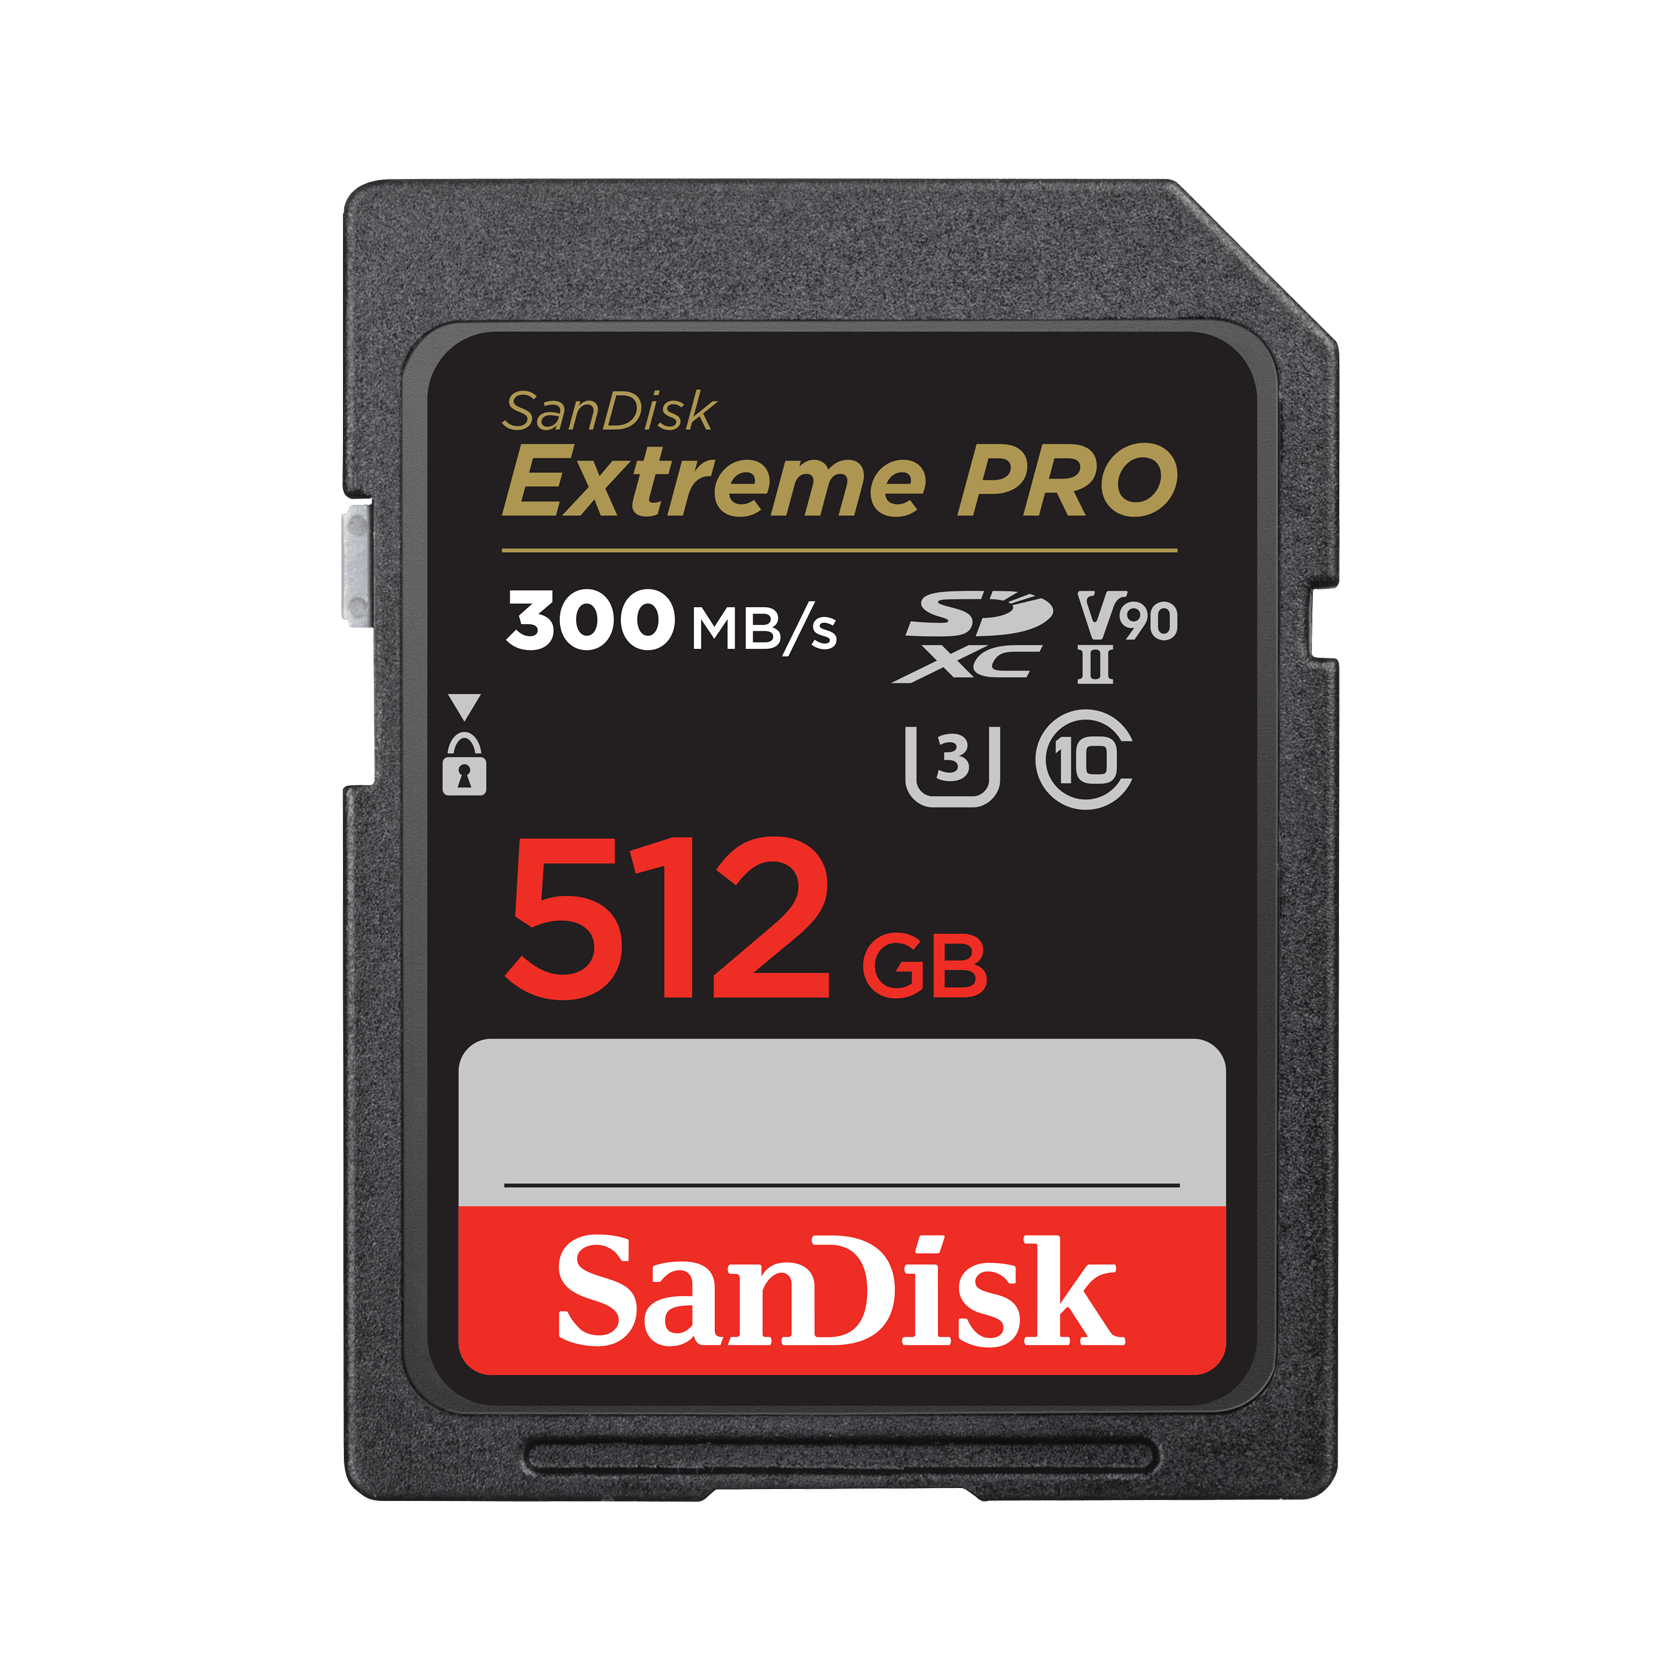 SanDisk Extreme PRO SDXC™ UHS-Il - 512GB - SDSDXDK-512G-GN4IN